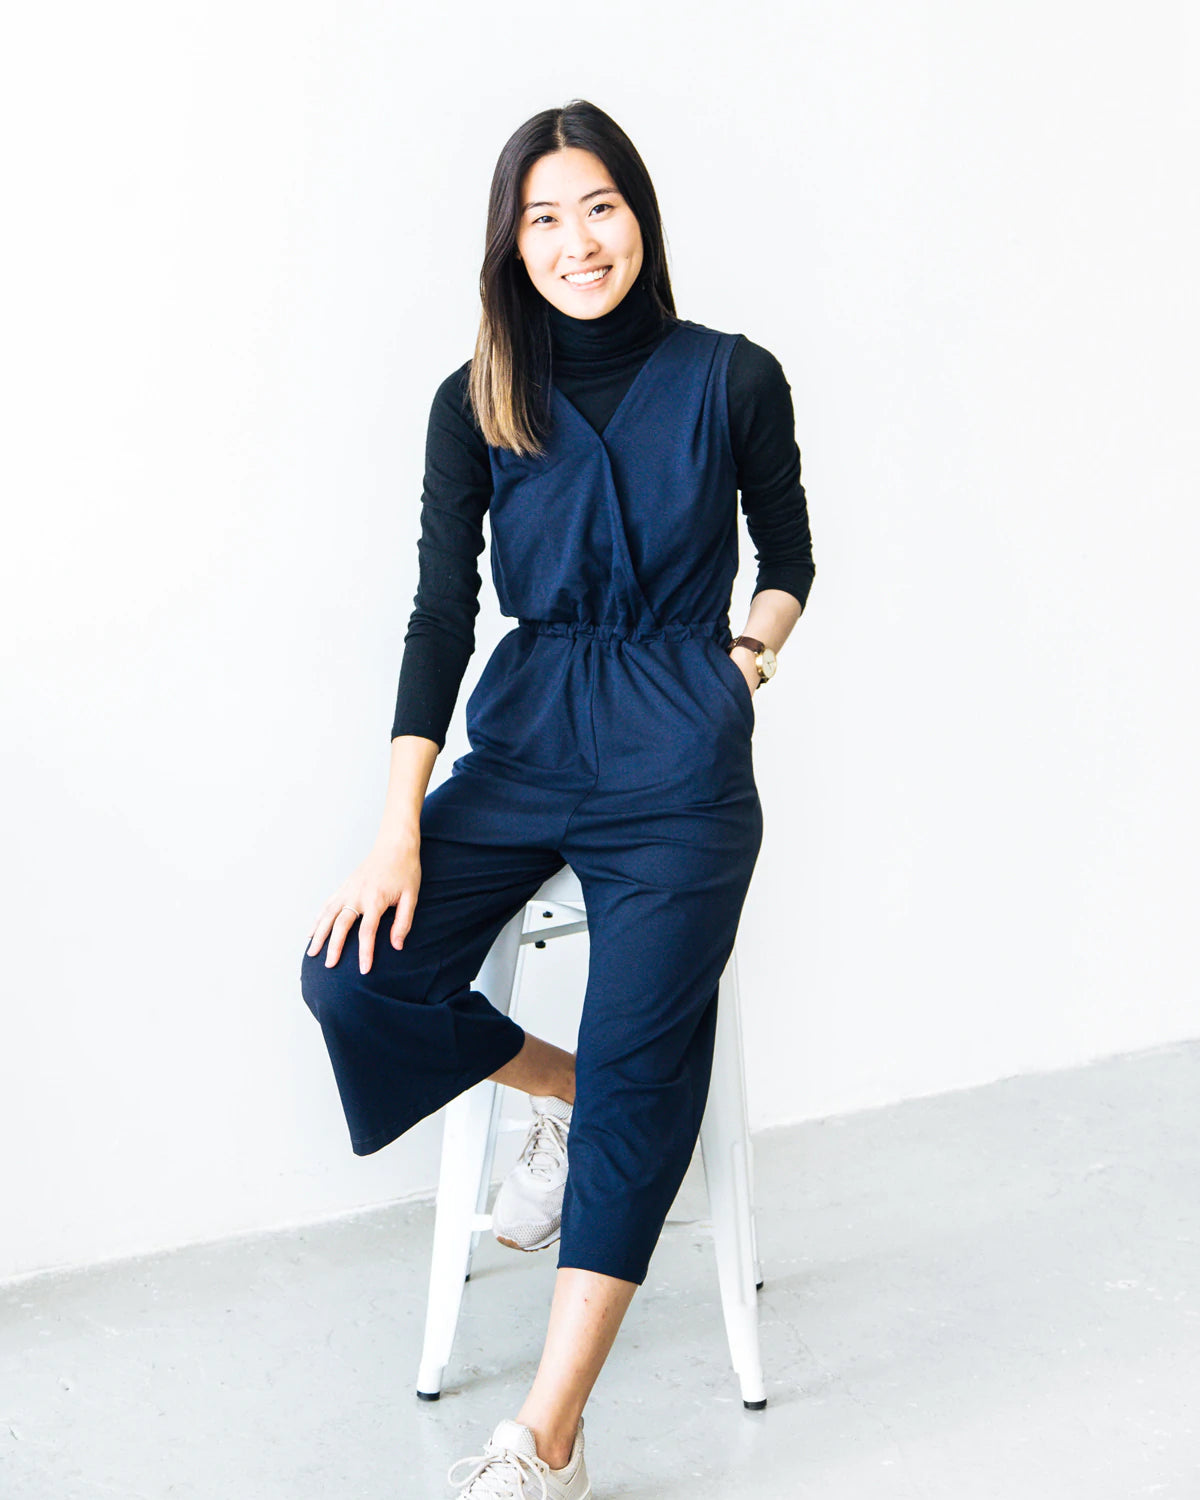 A Minimalist Blogger's Best Advice for Dressing From Day to Night